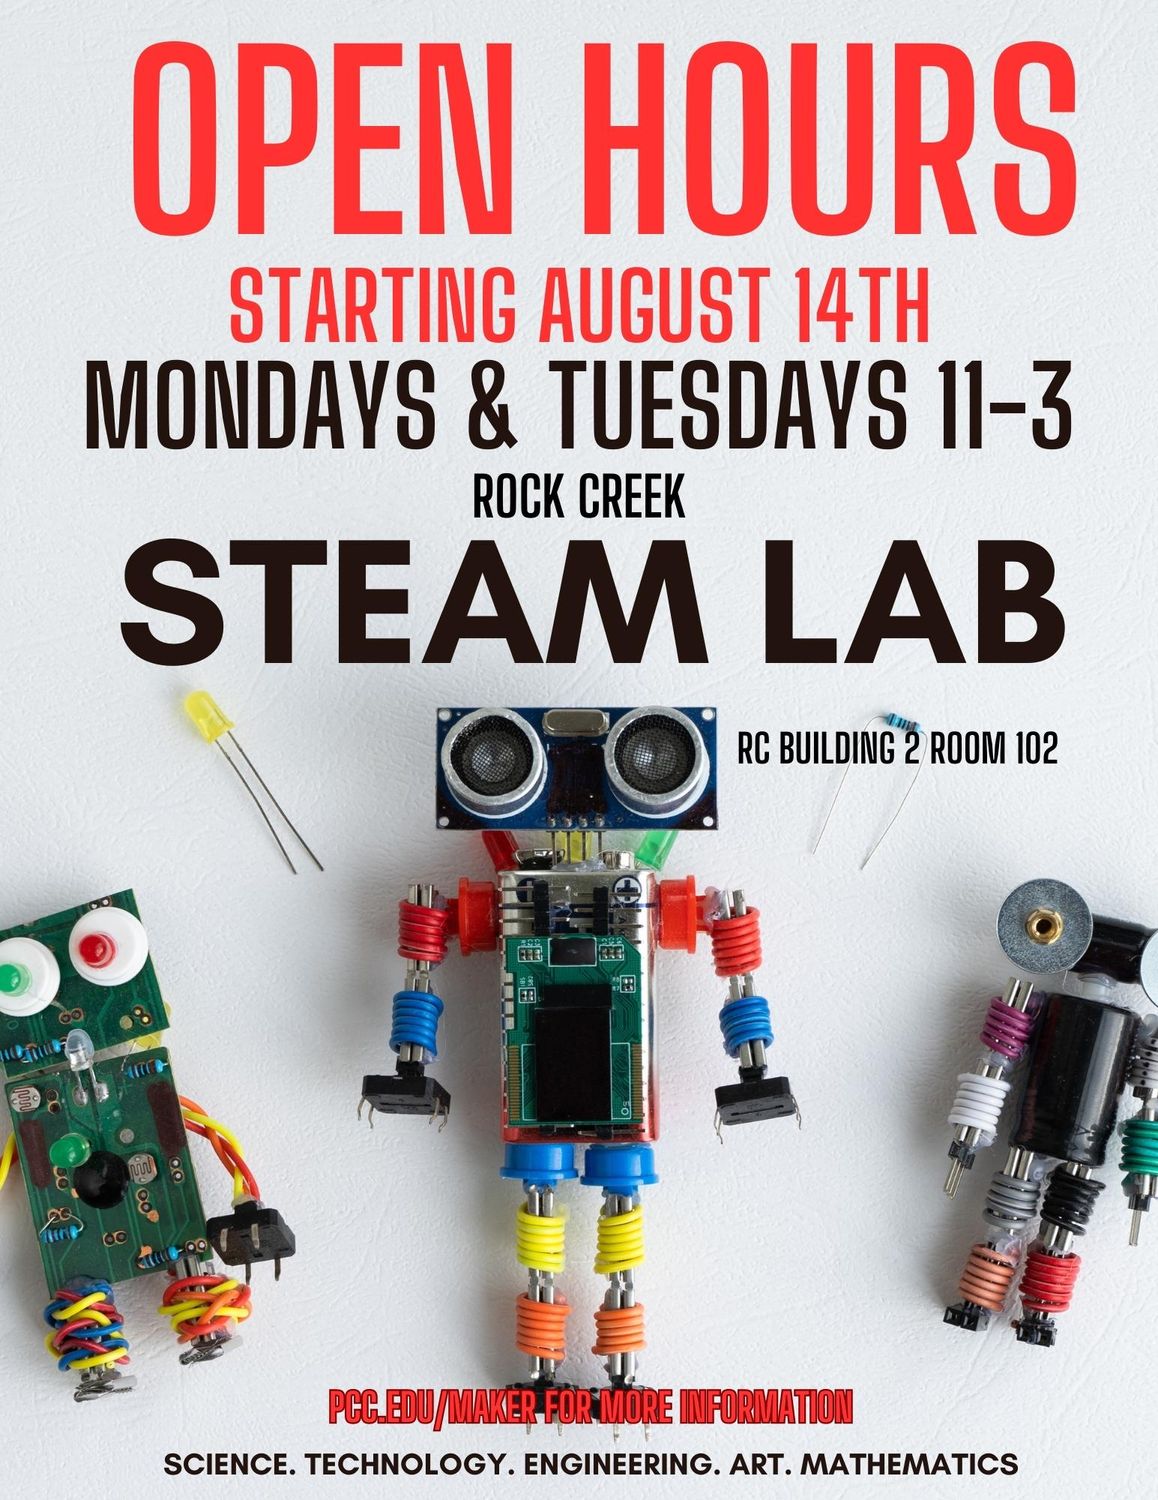 Open hours | Starting August 14th, 2023 | Mondays and Tuesdays 11 AM - 3 PM | Rock Creek Campus | STEAM Lab | RC Building 2 Room 102 | visit pcc.edu/maker for more information